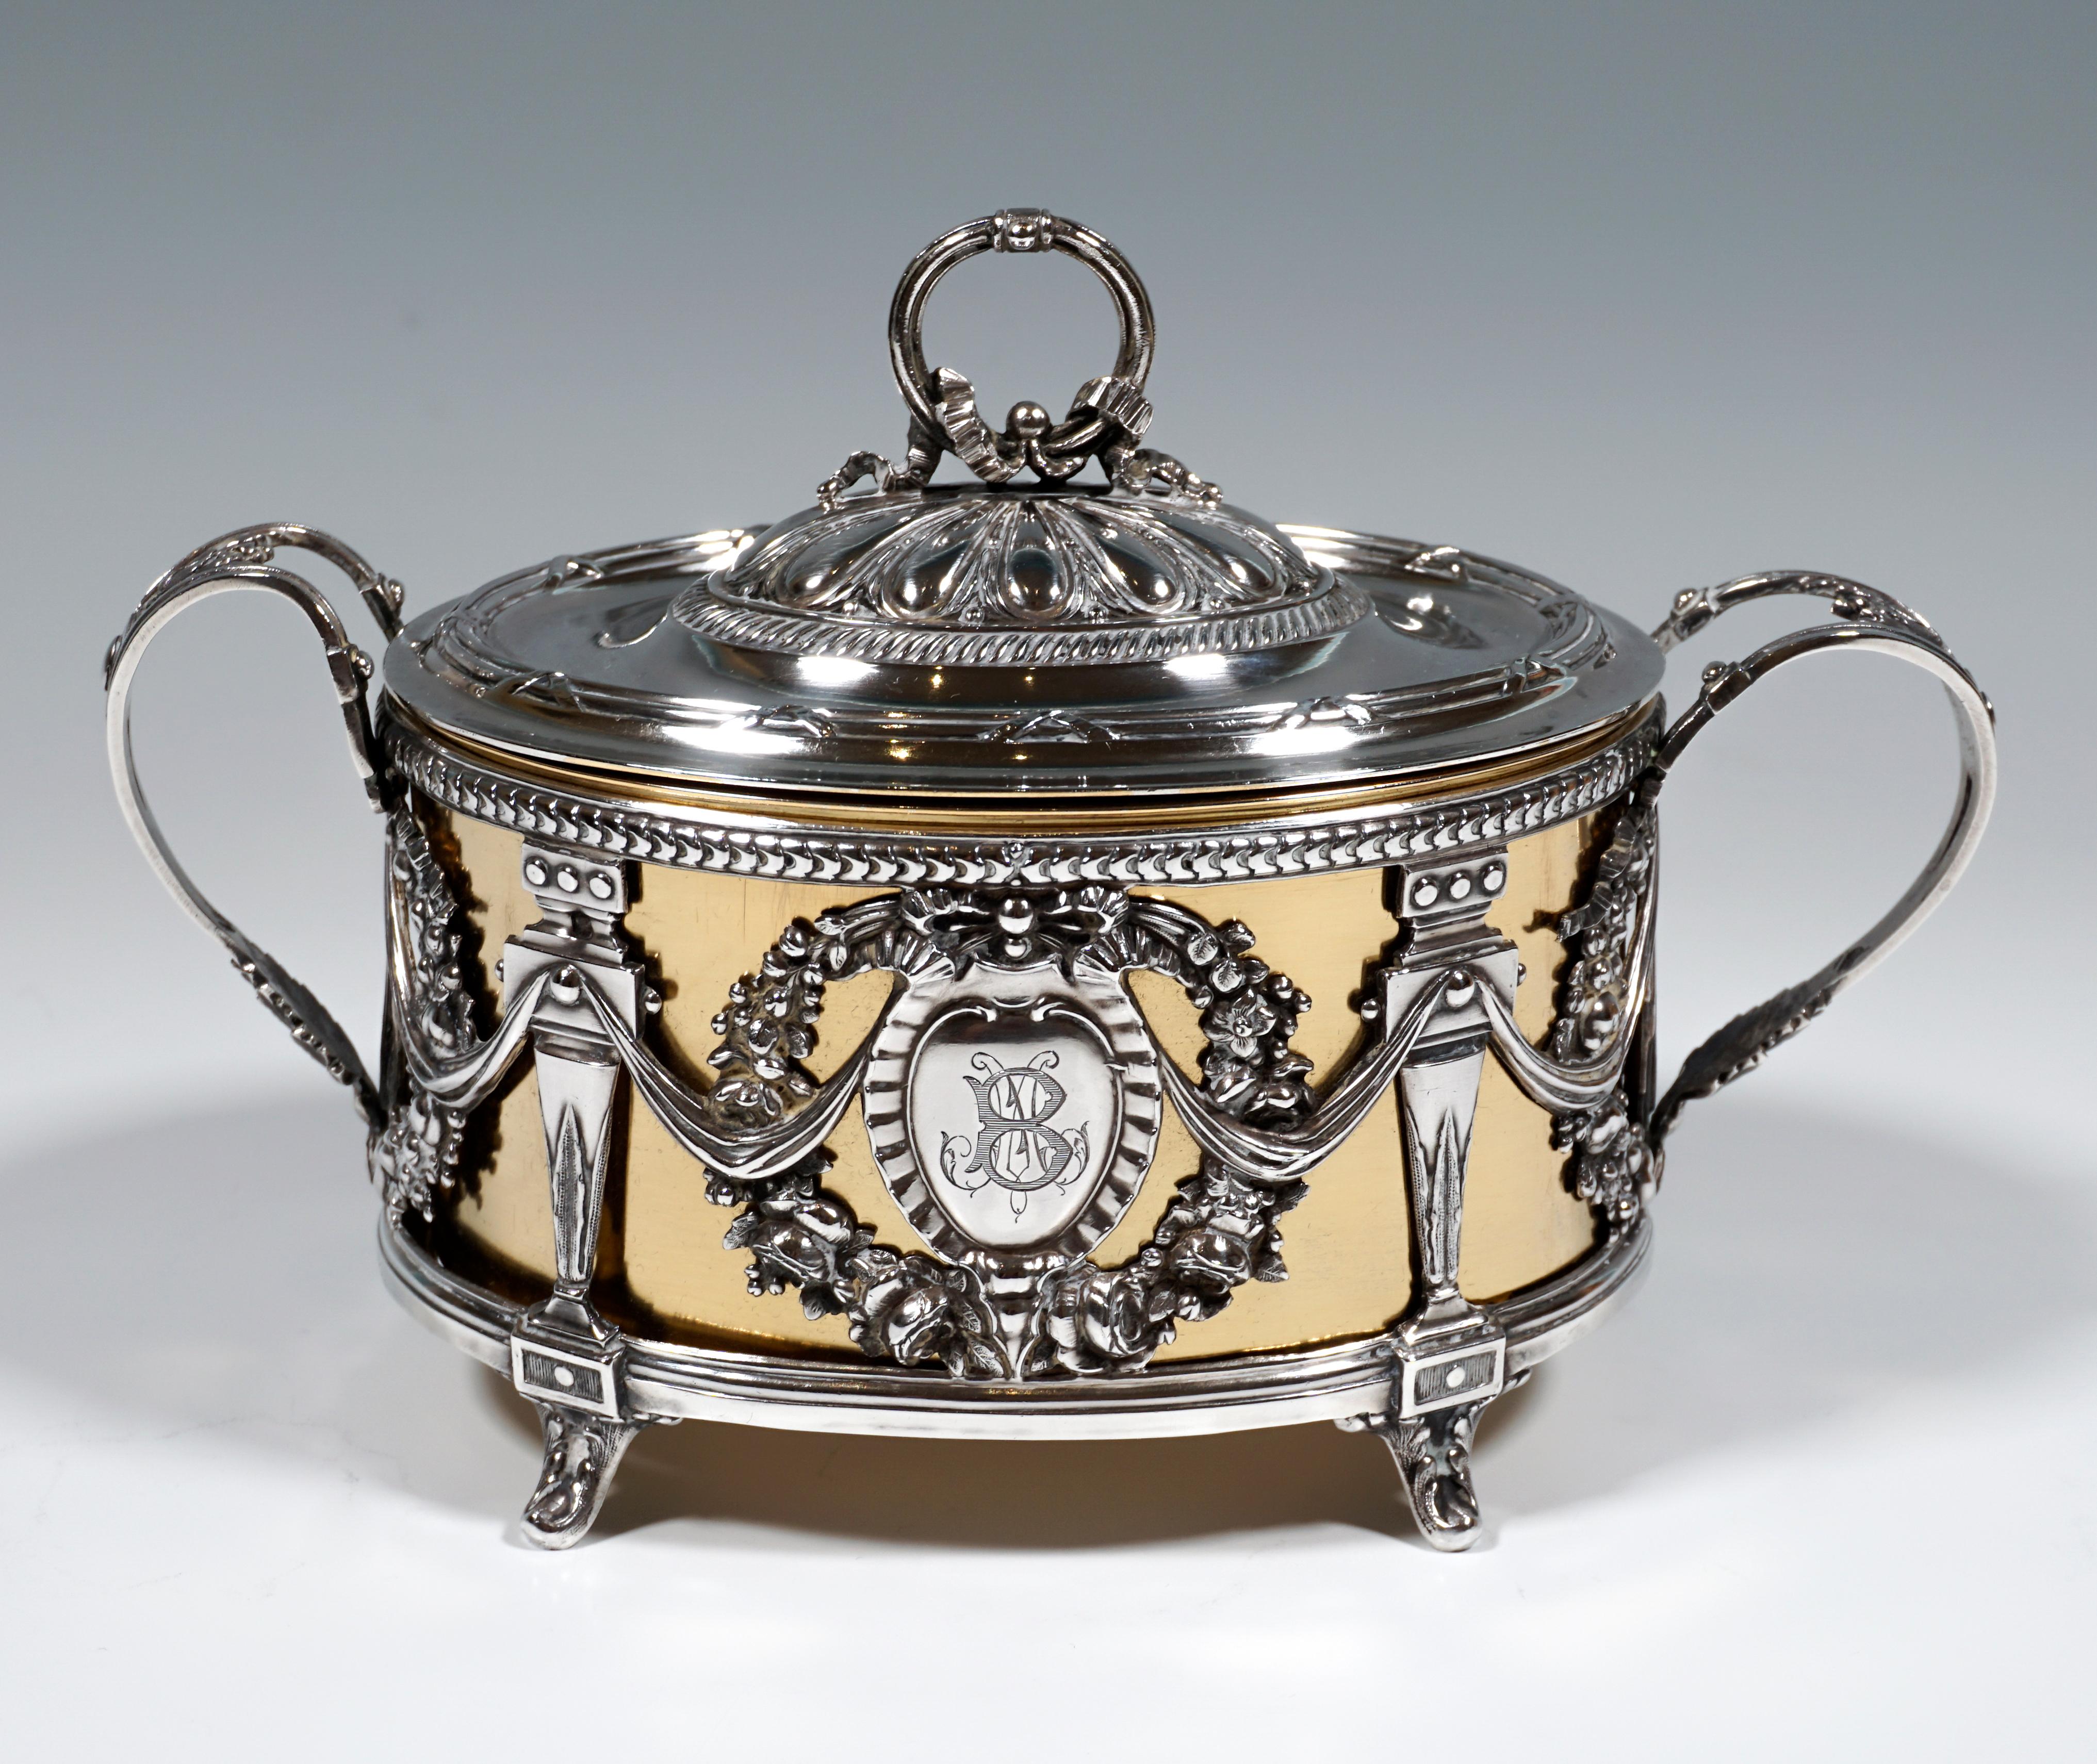 French Magnificent Silver Sugar Bowl with Gilding, Adolphe Boulenger Paris, around 1890